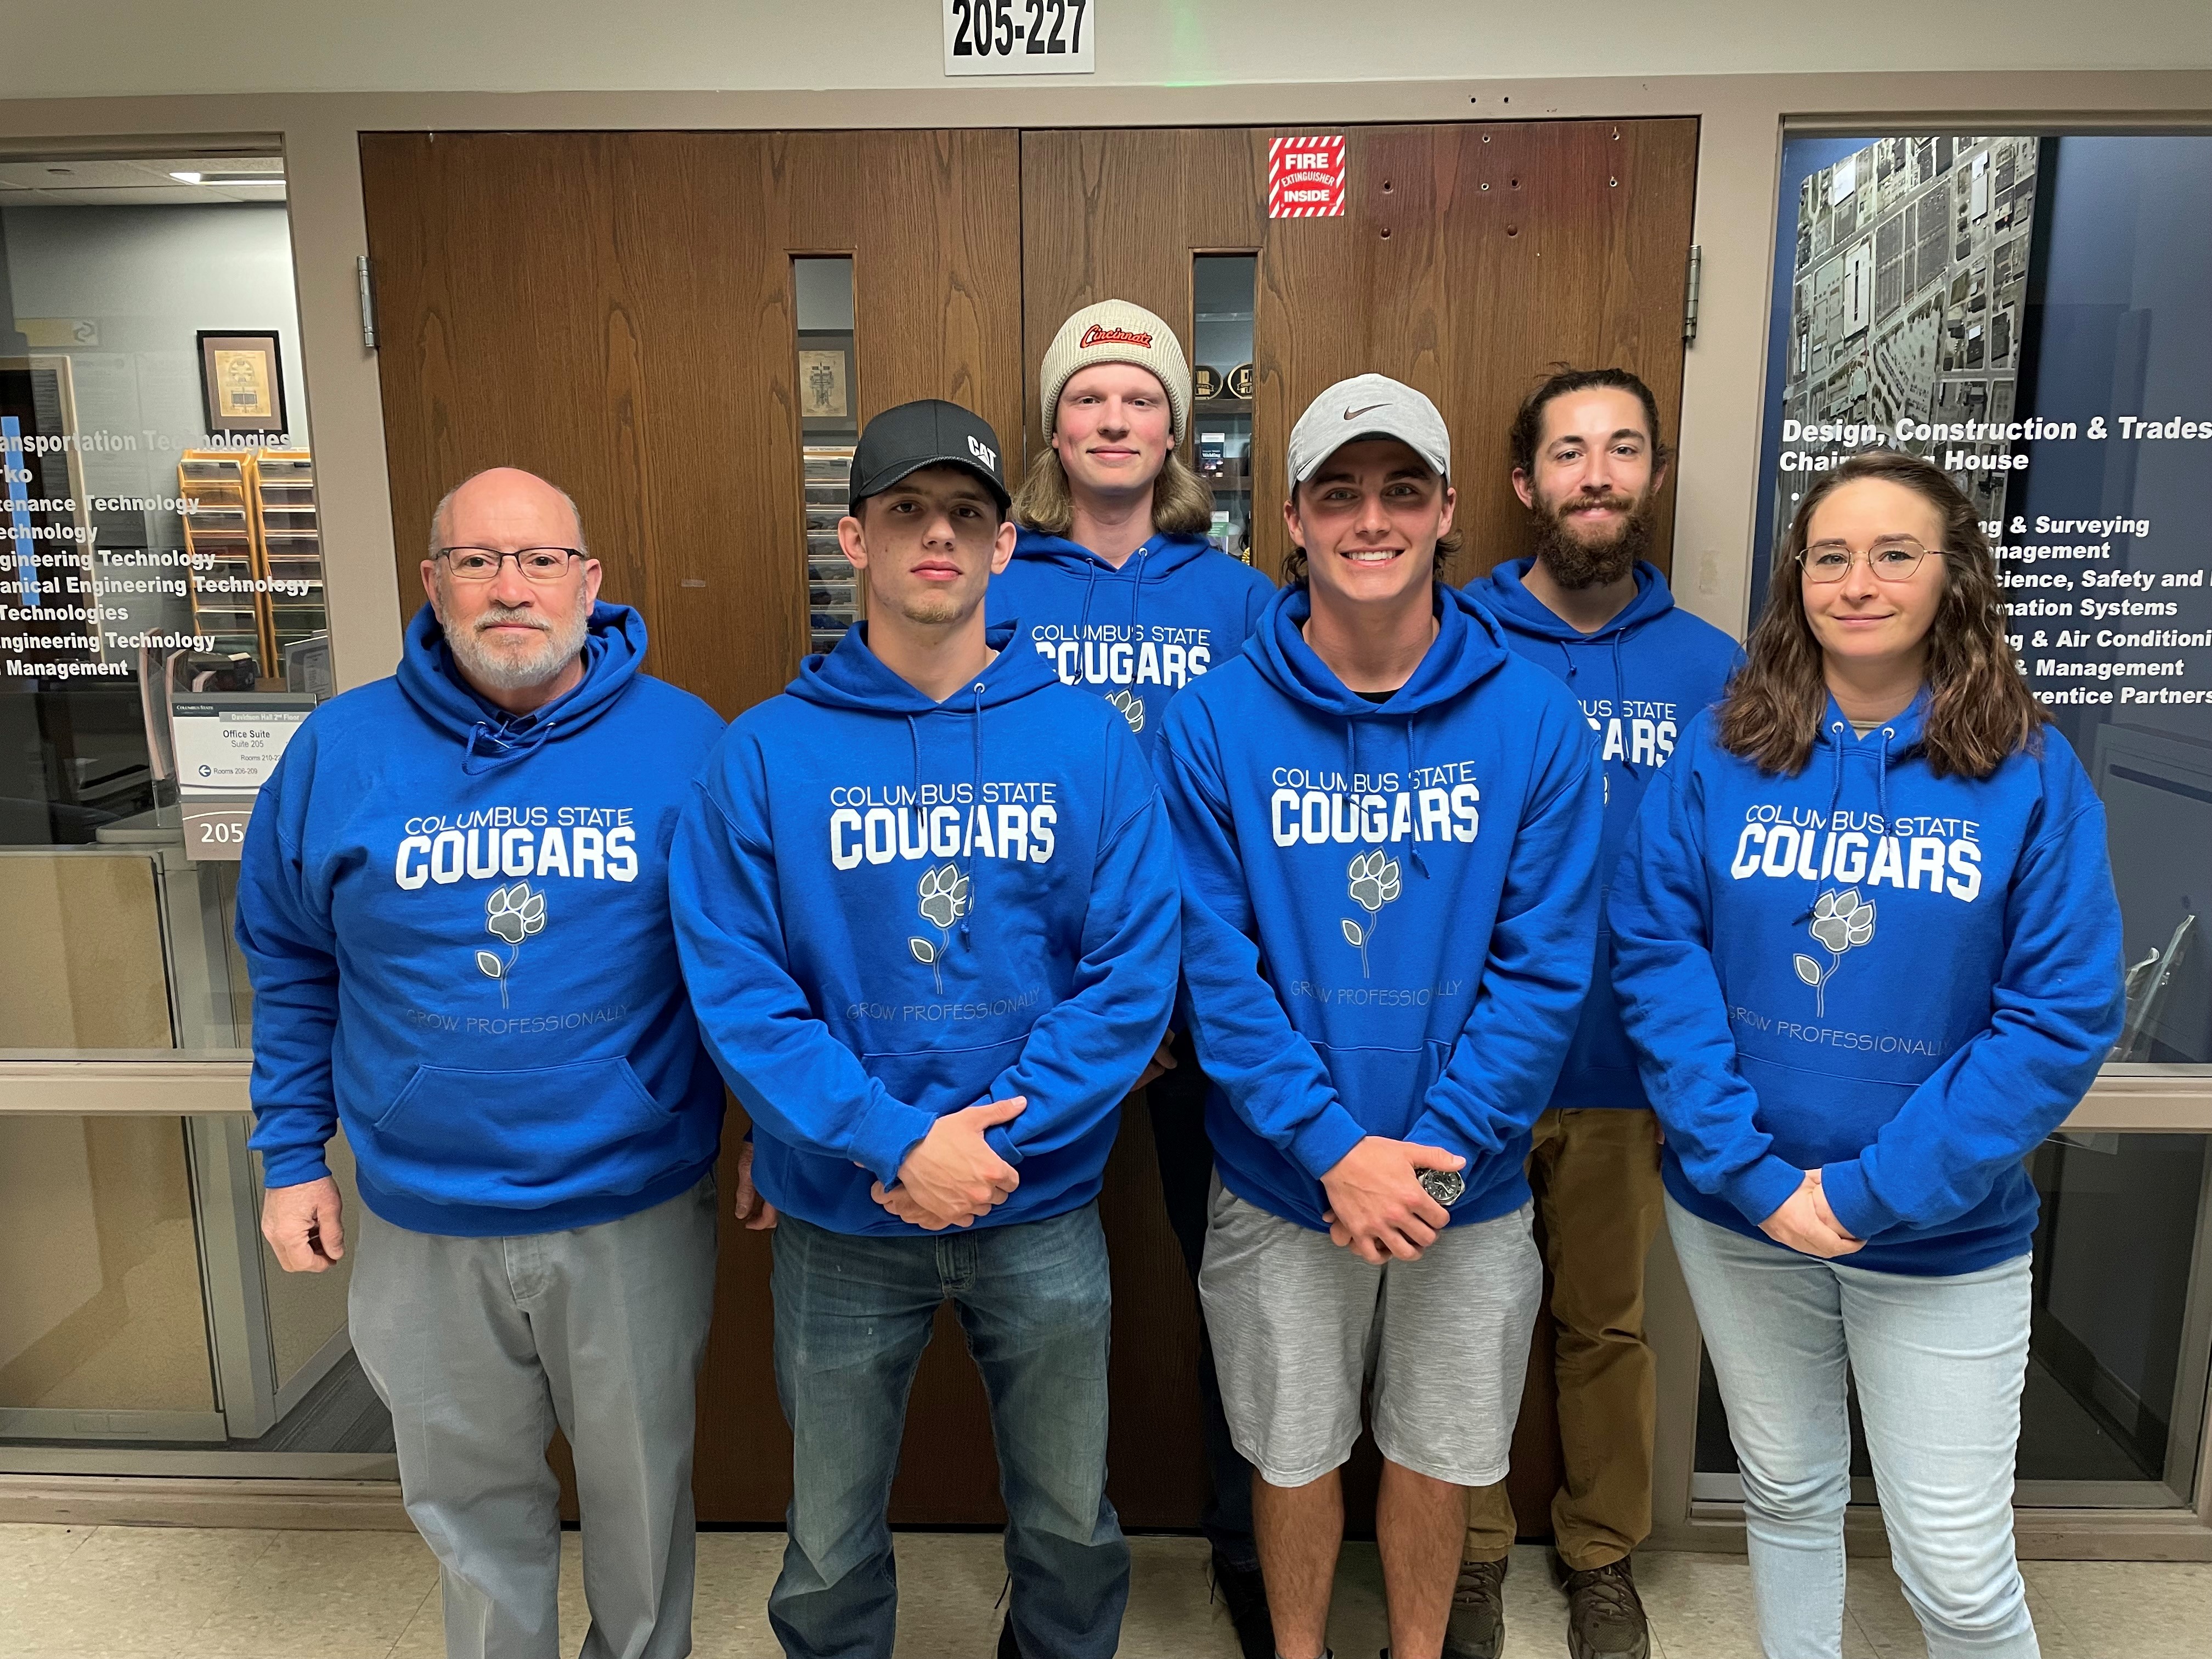 Pictured, left to right, Professor Dick Ansley, and students AJ McCoy, AJ Lightfoot, Owen Forchione, Ryan Bodley, and Kristen McDonald.